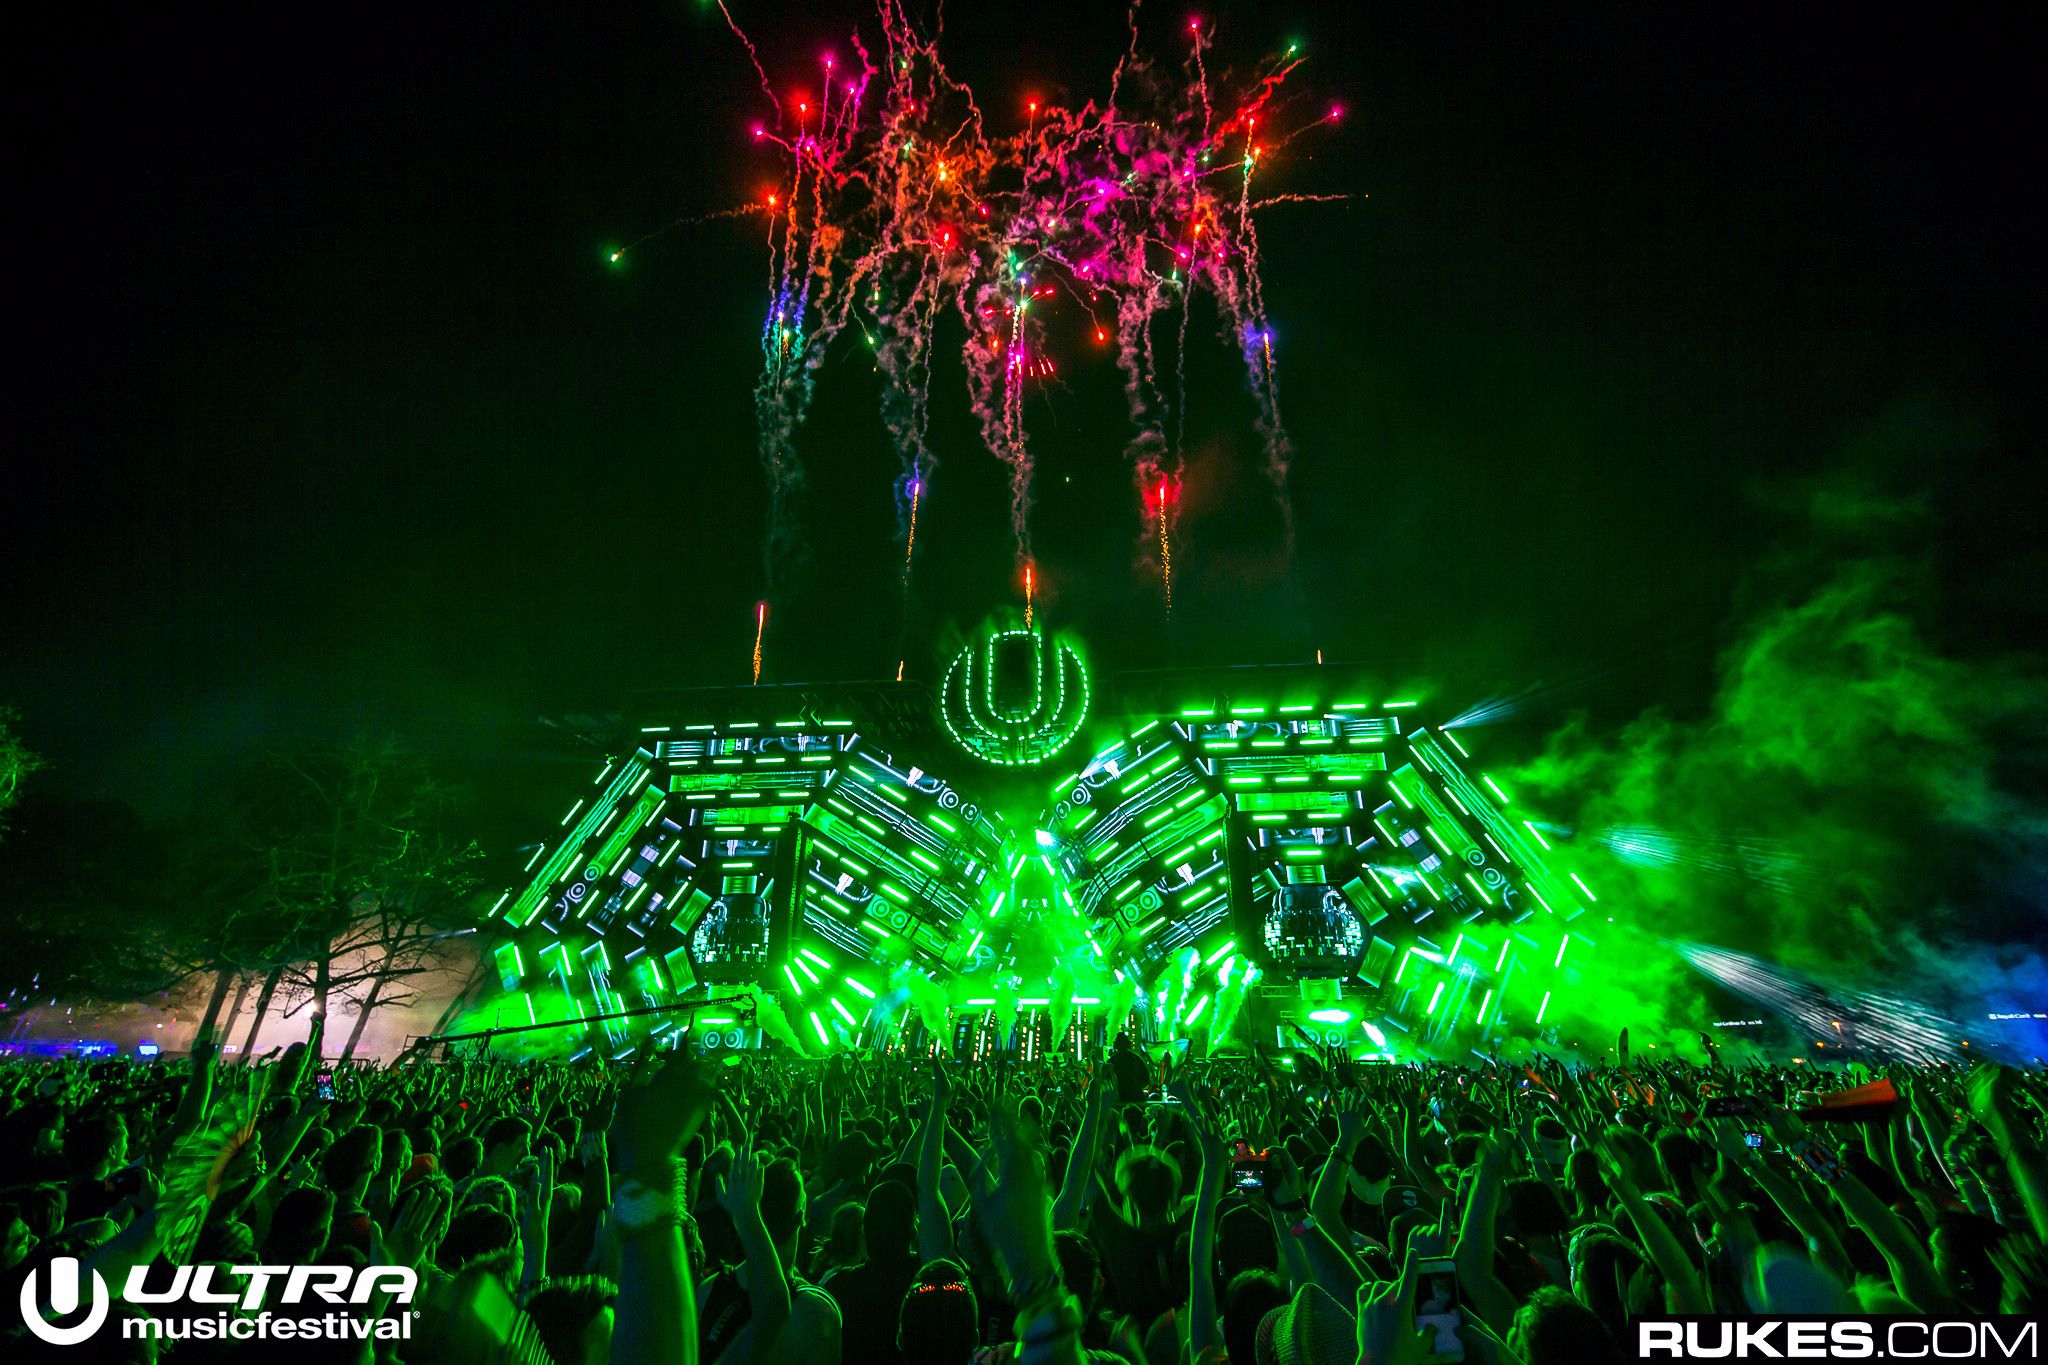 [NÓNG] Lộ Thiết Kế Mainstage Ultra Music Festival 2018?